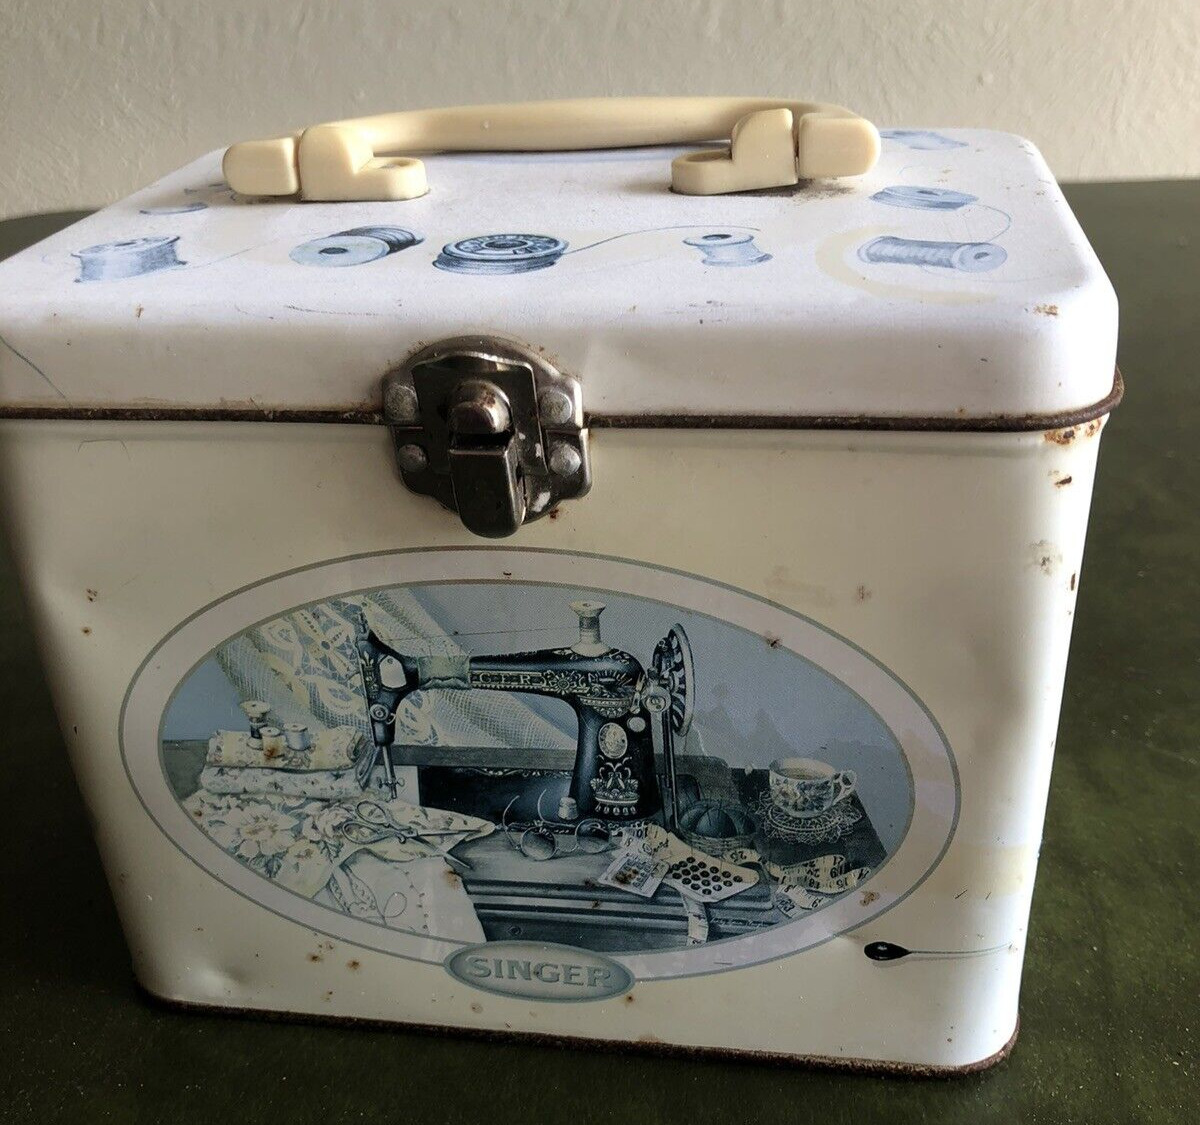 Vintage 1940's Singer Sewing Machine Accessory Box with lid, white and blue